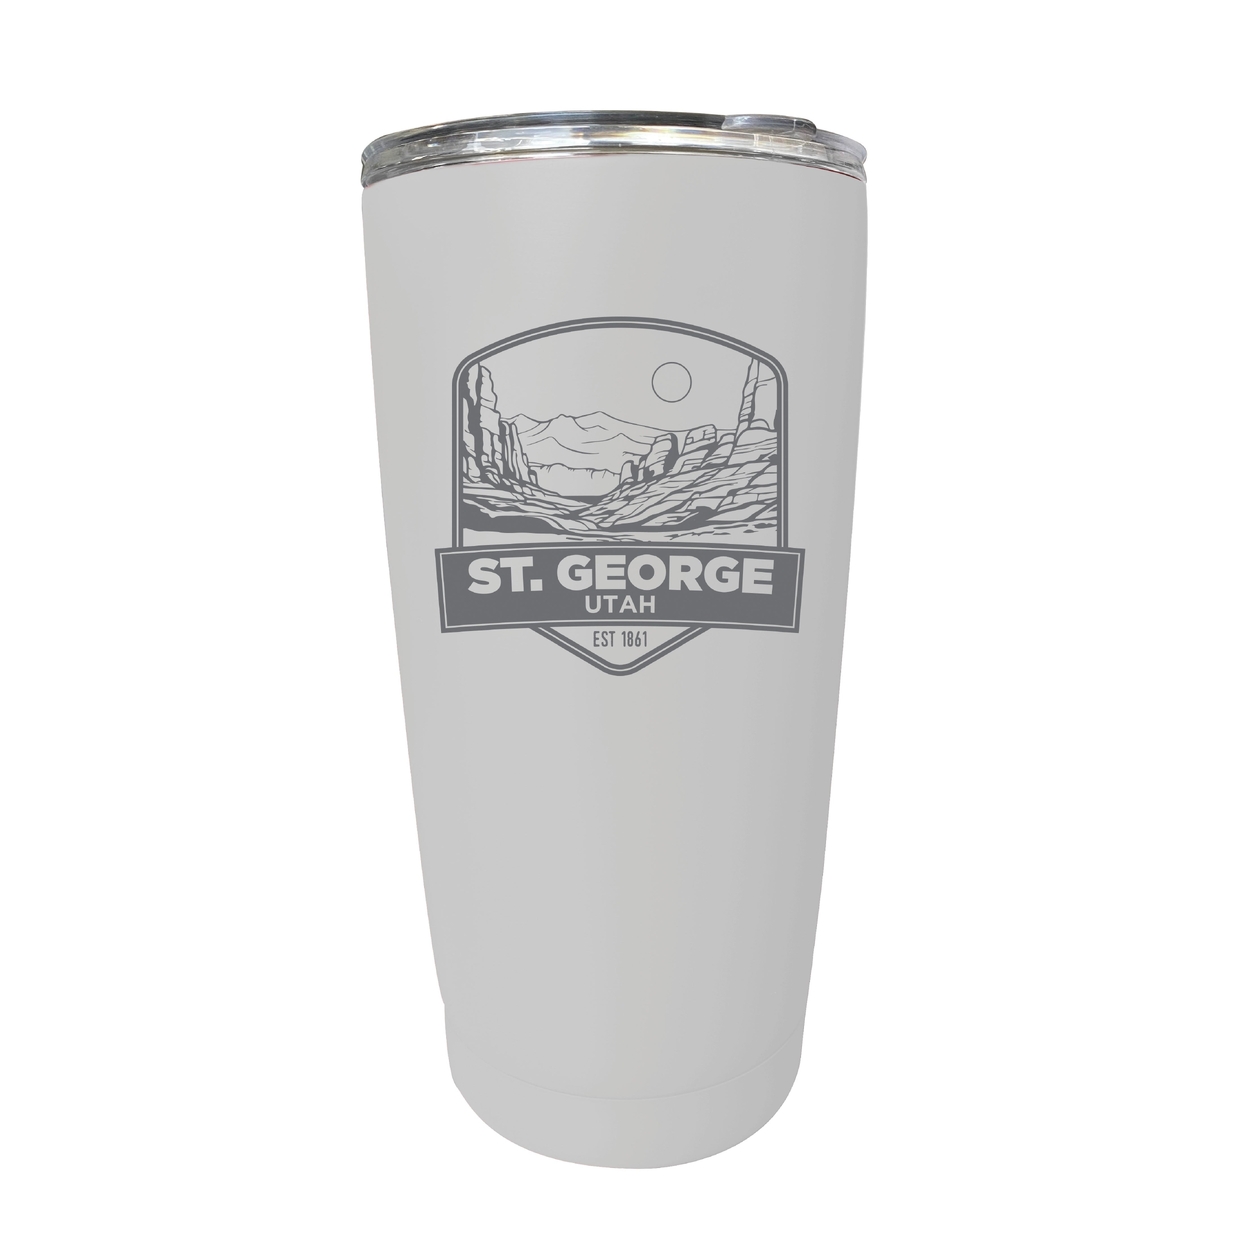 St. George Utah Souvenir 16 Oz Engraved Stainless Steel Insulated Tumbler - White,,4-Pack